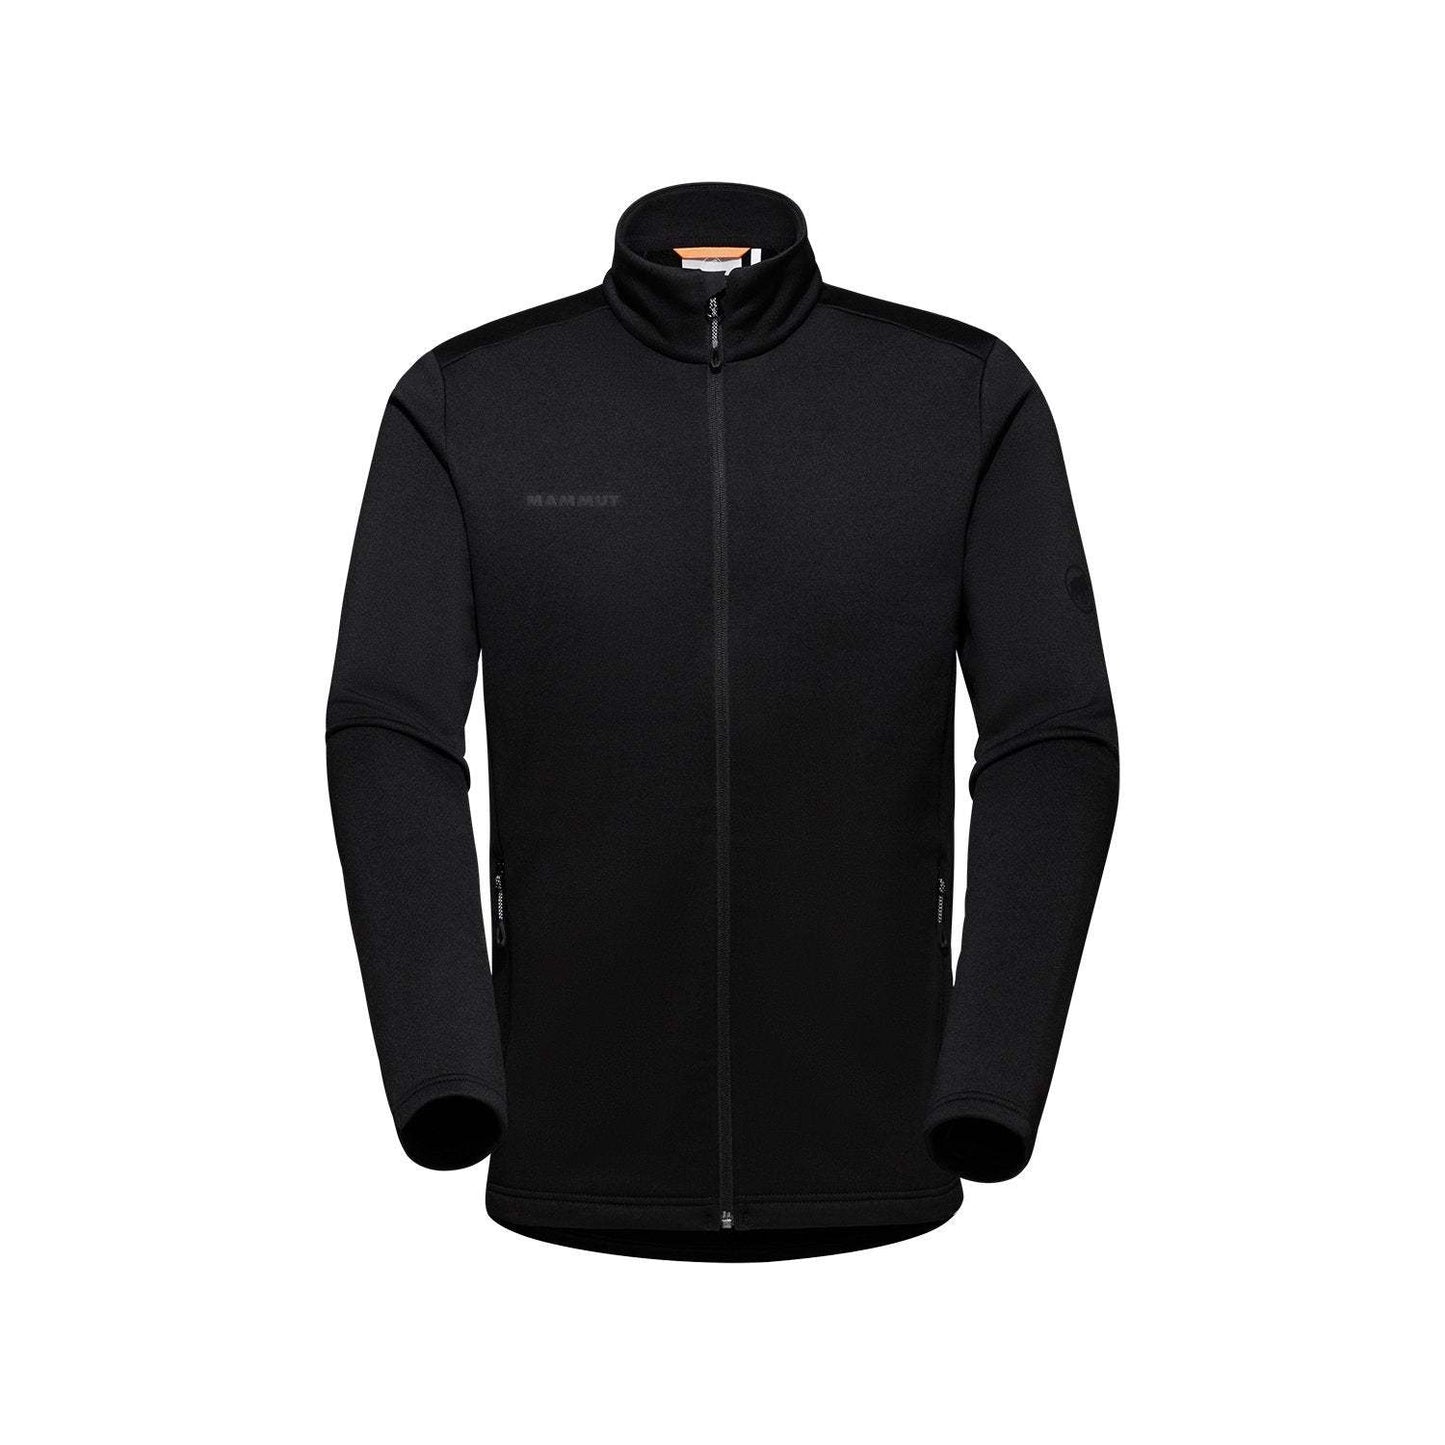 Men's Corporate Mid-Layer Jacket by Mammut - The Luxury Promotional Gifts Company Limited